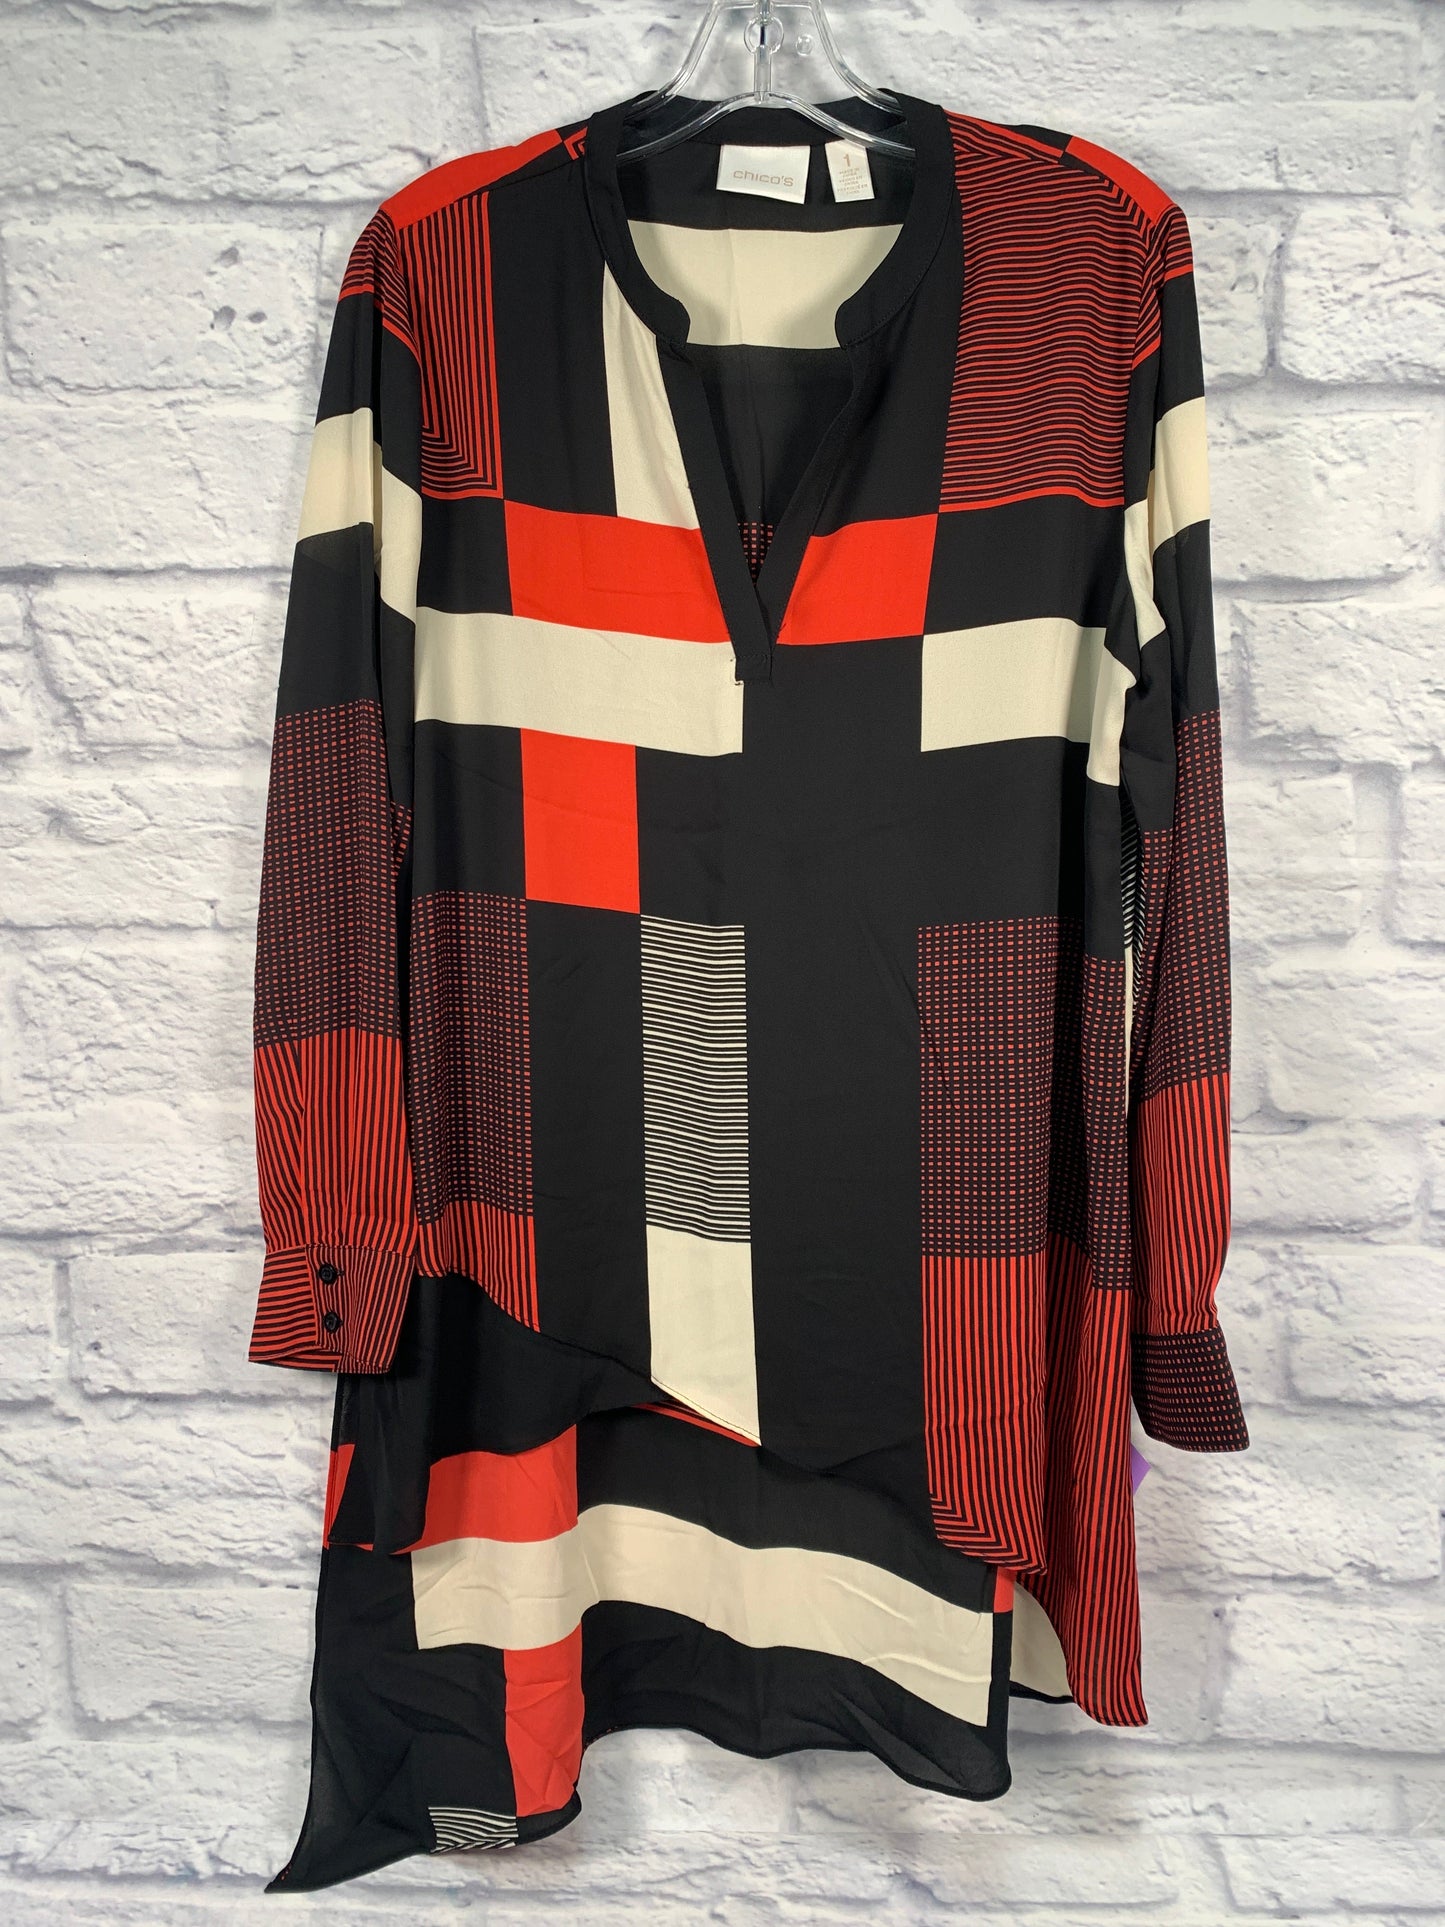 Black & Red Tunic Long Sleeve Chicos, Size M